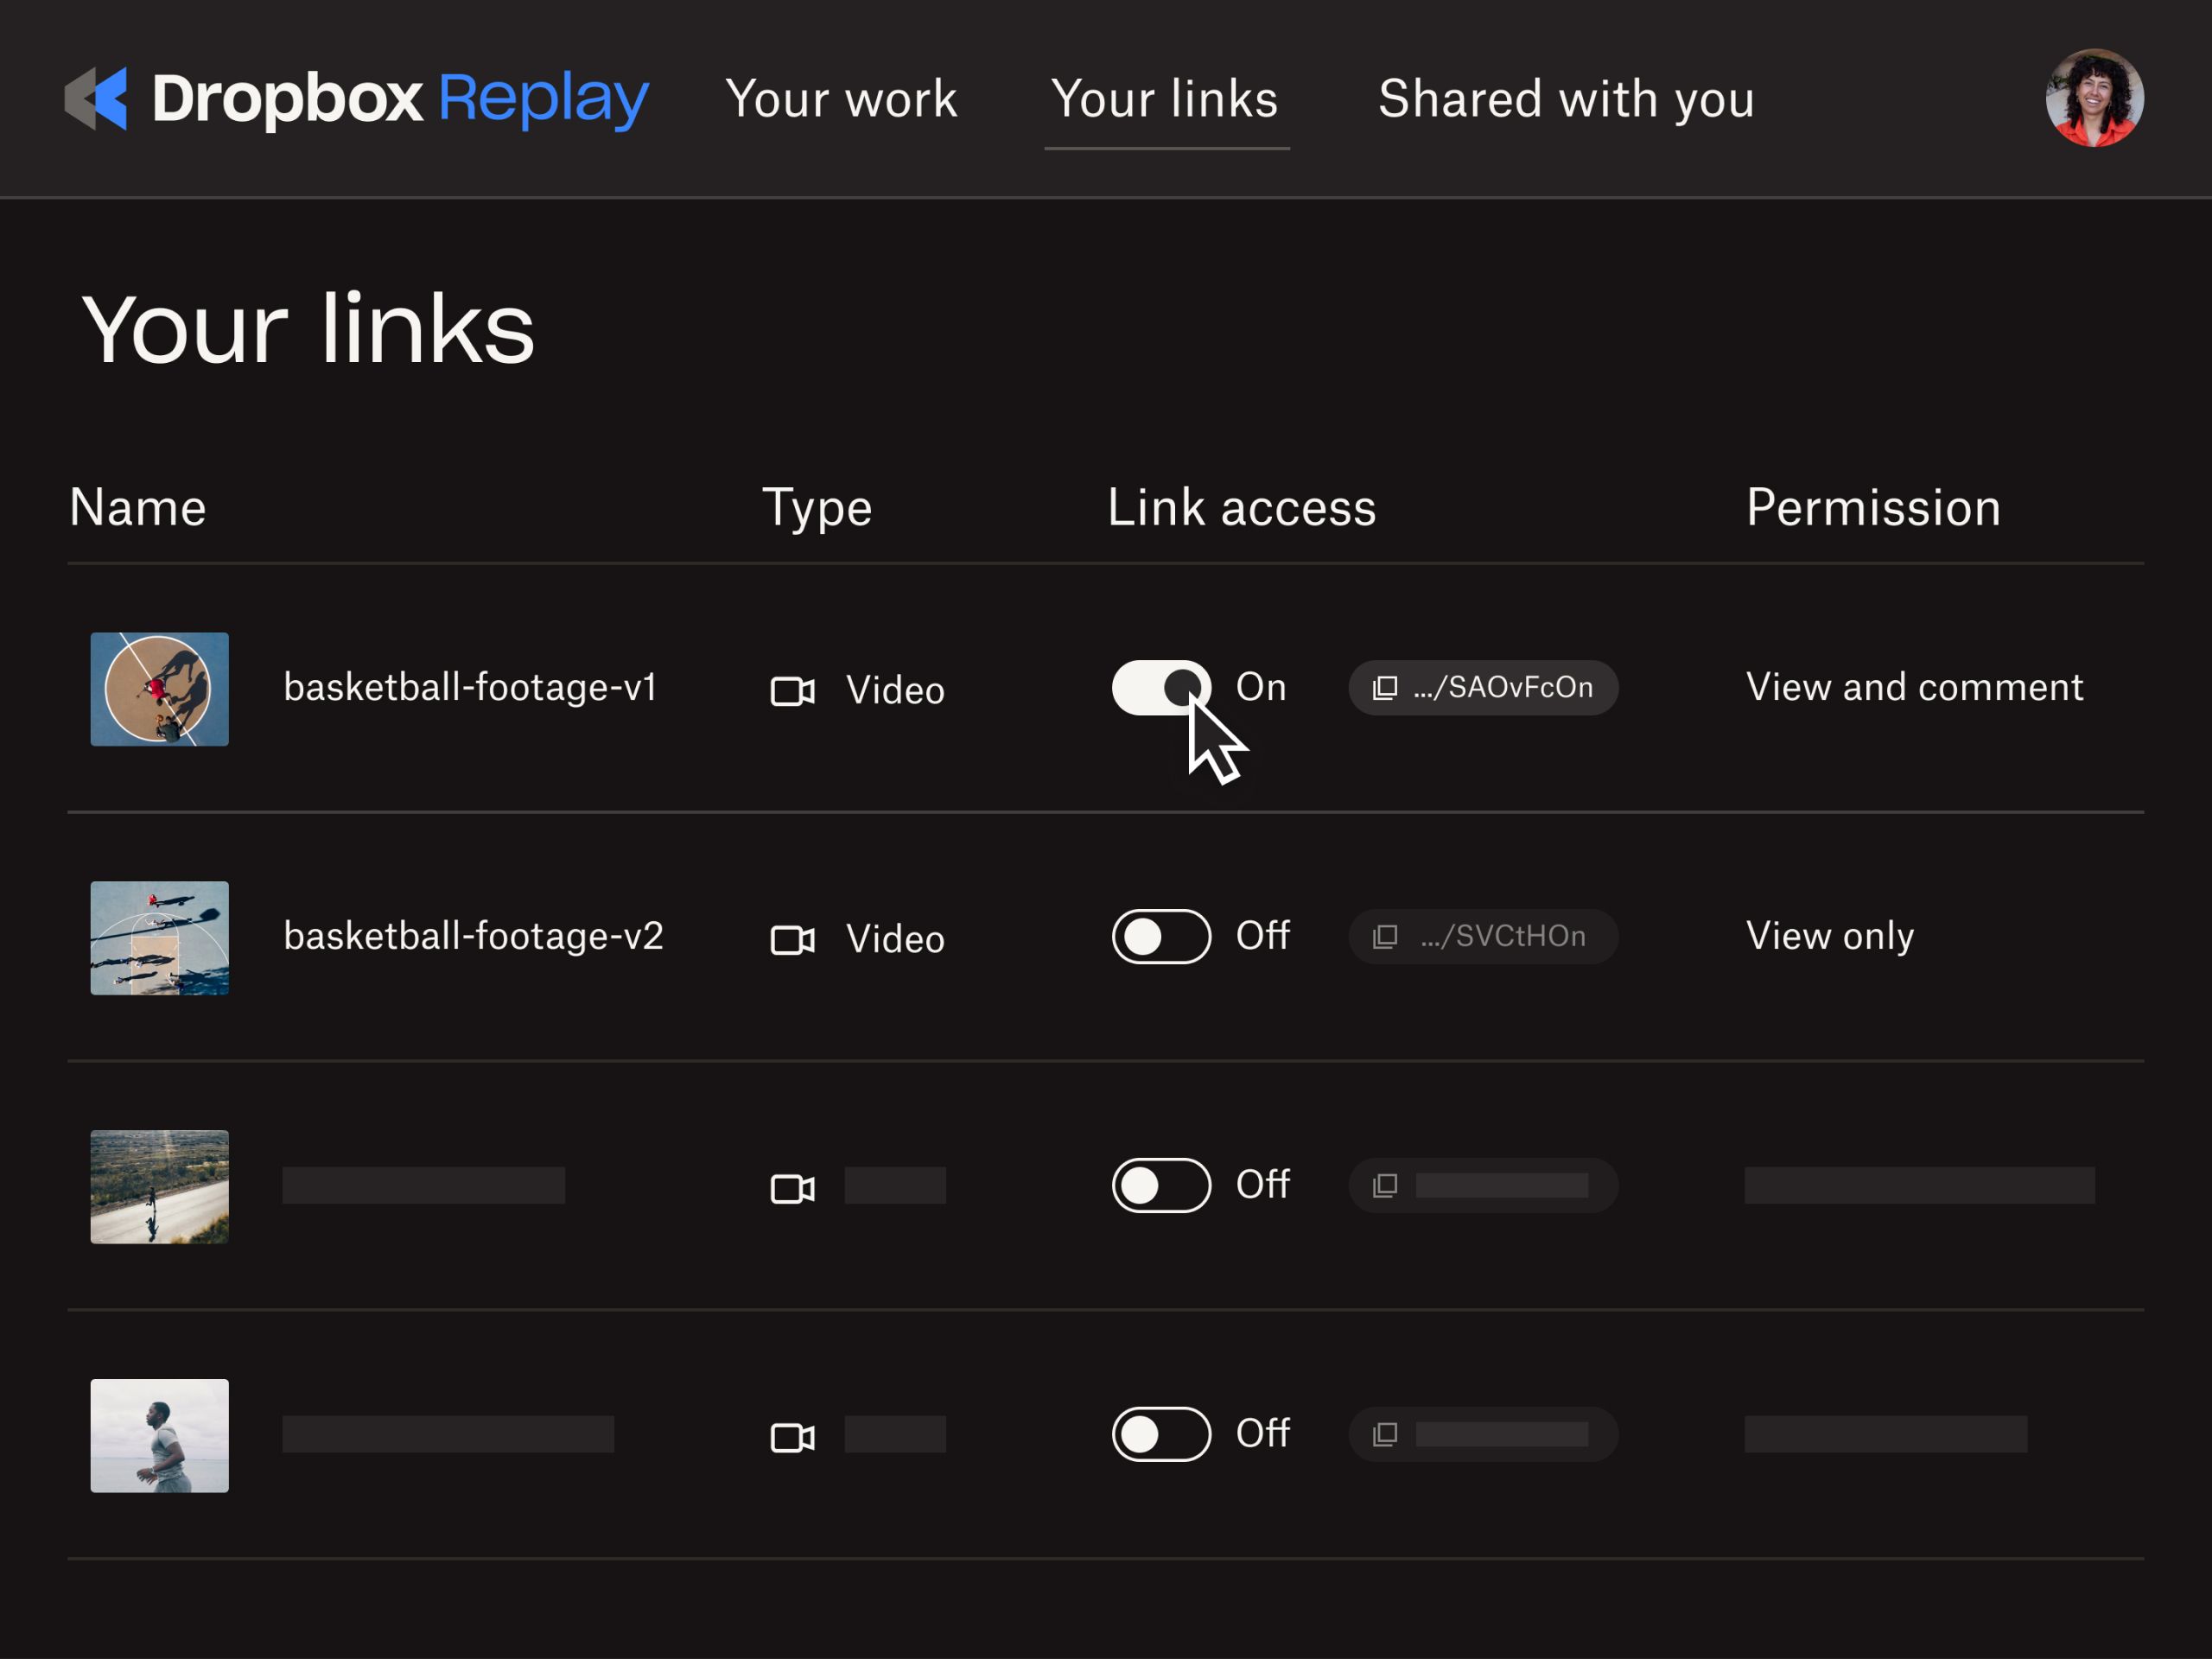 Product UI shows how to set up permissions and link access in Dropbox Replay